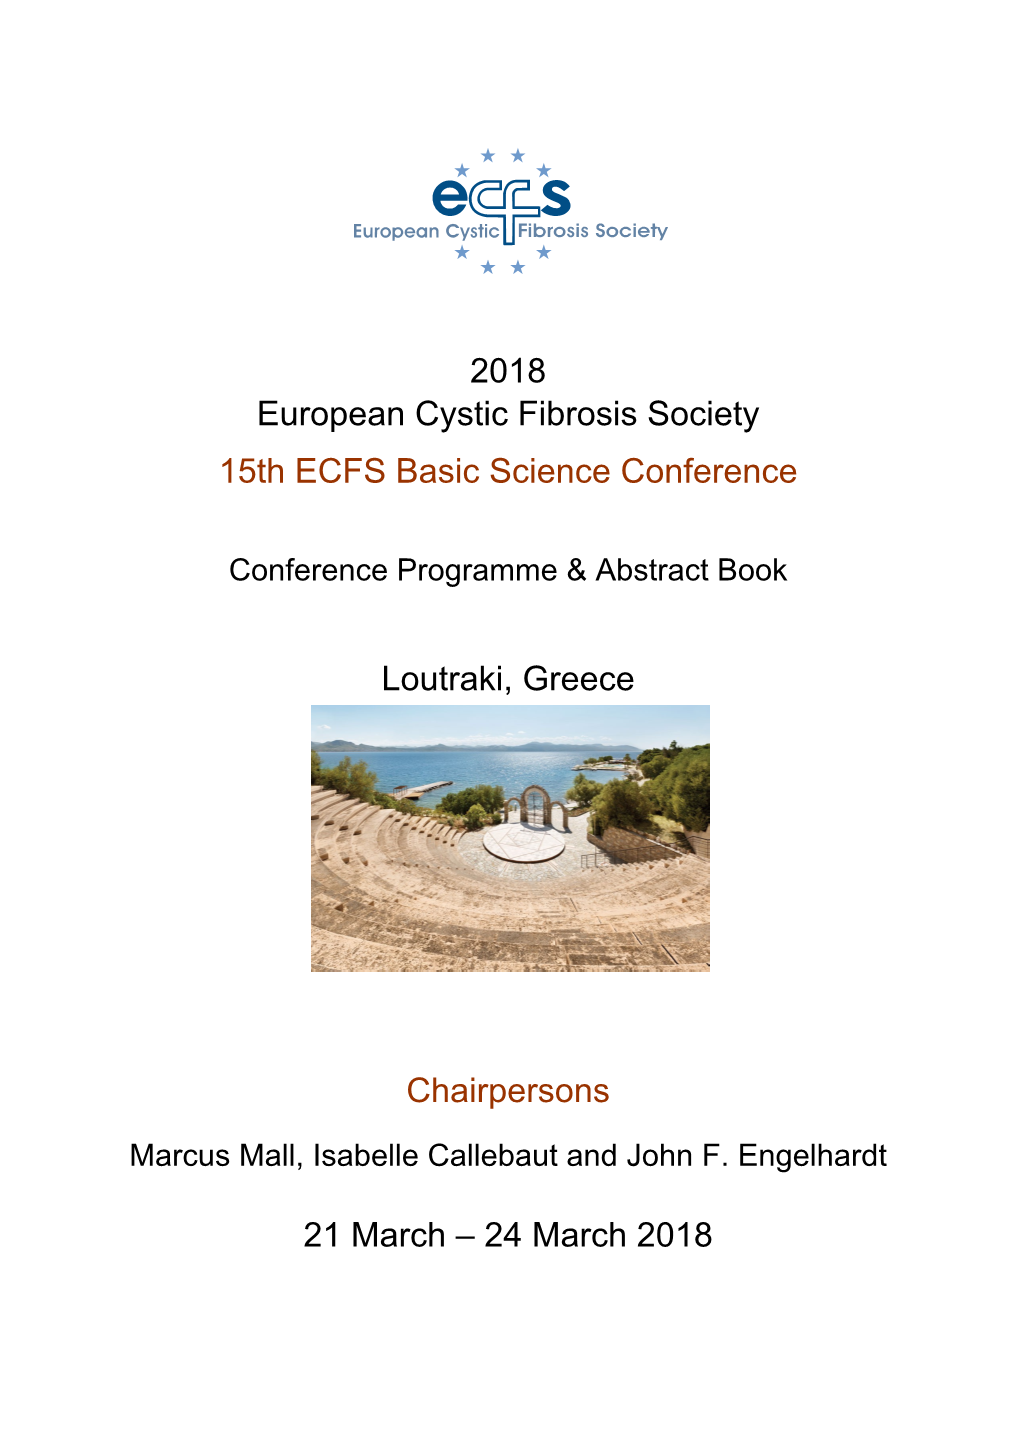 2018 European Cystic Fibrosis Society 15Th ECFS Basic Science Conference